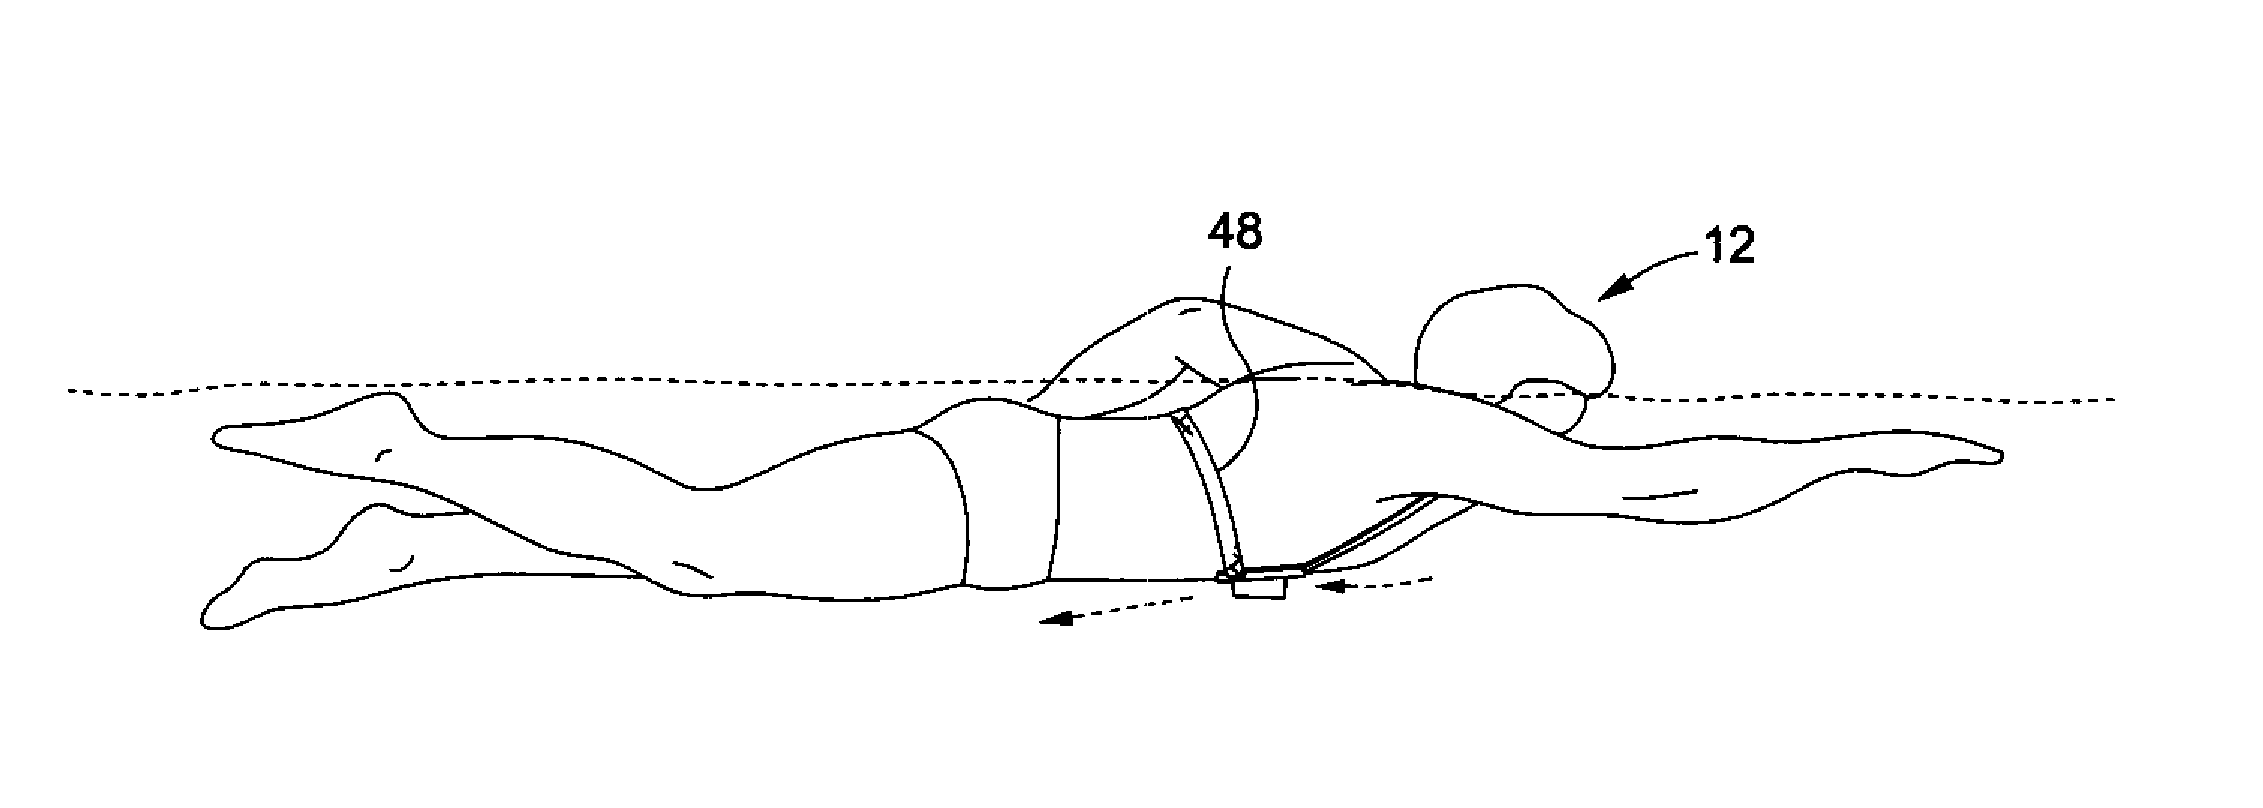 Auditory feedback device and method for swimming speed